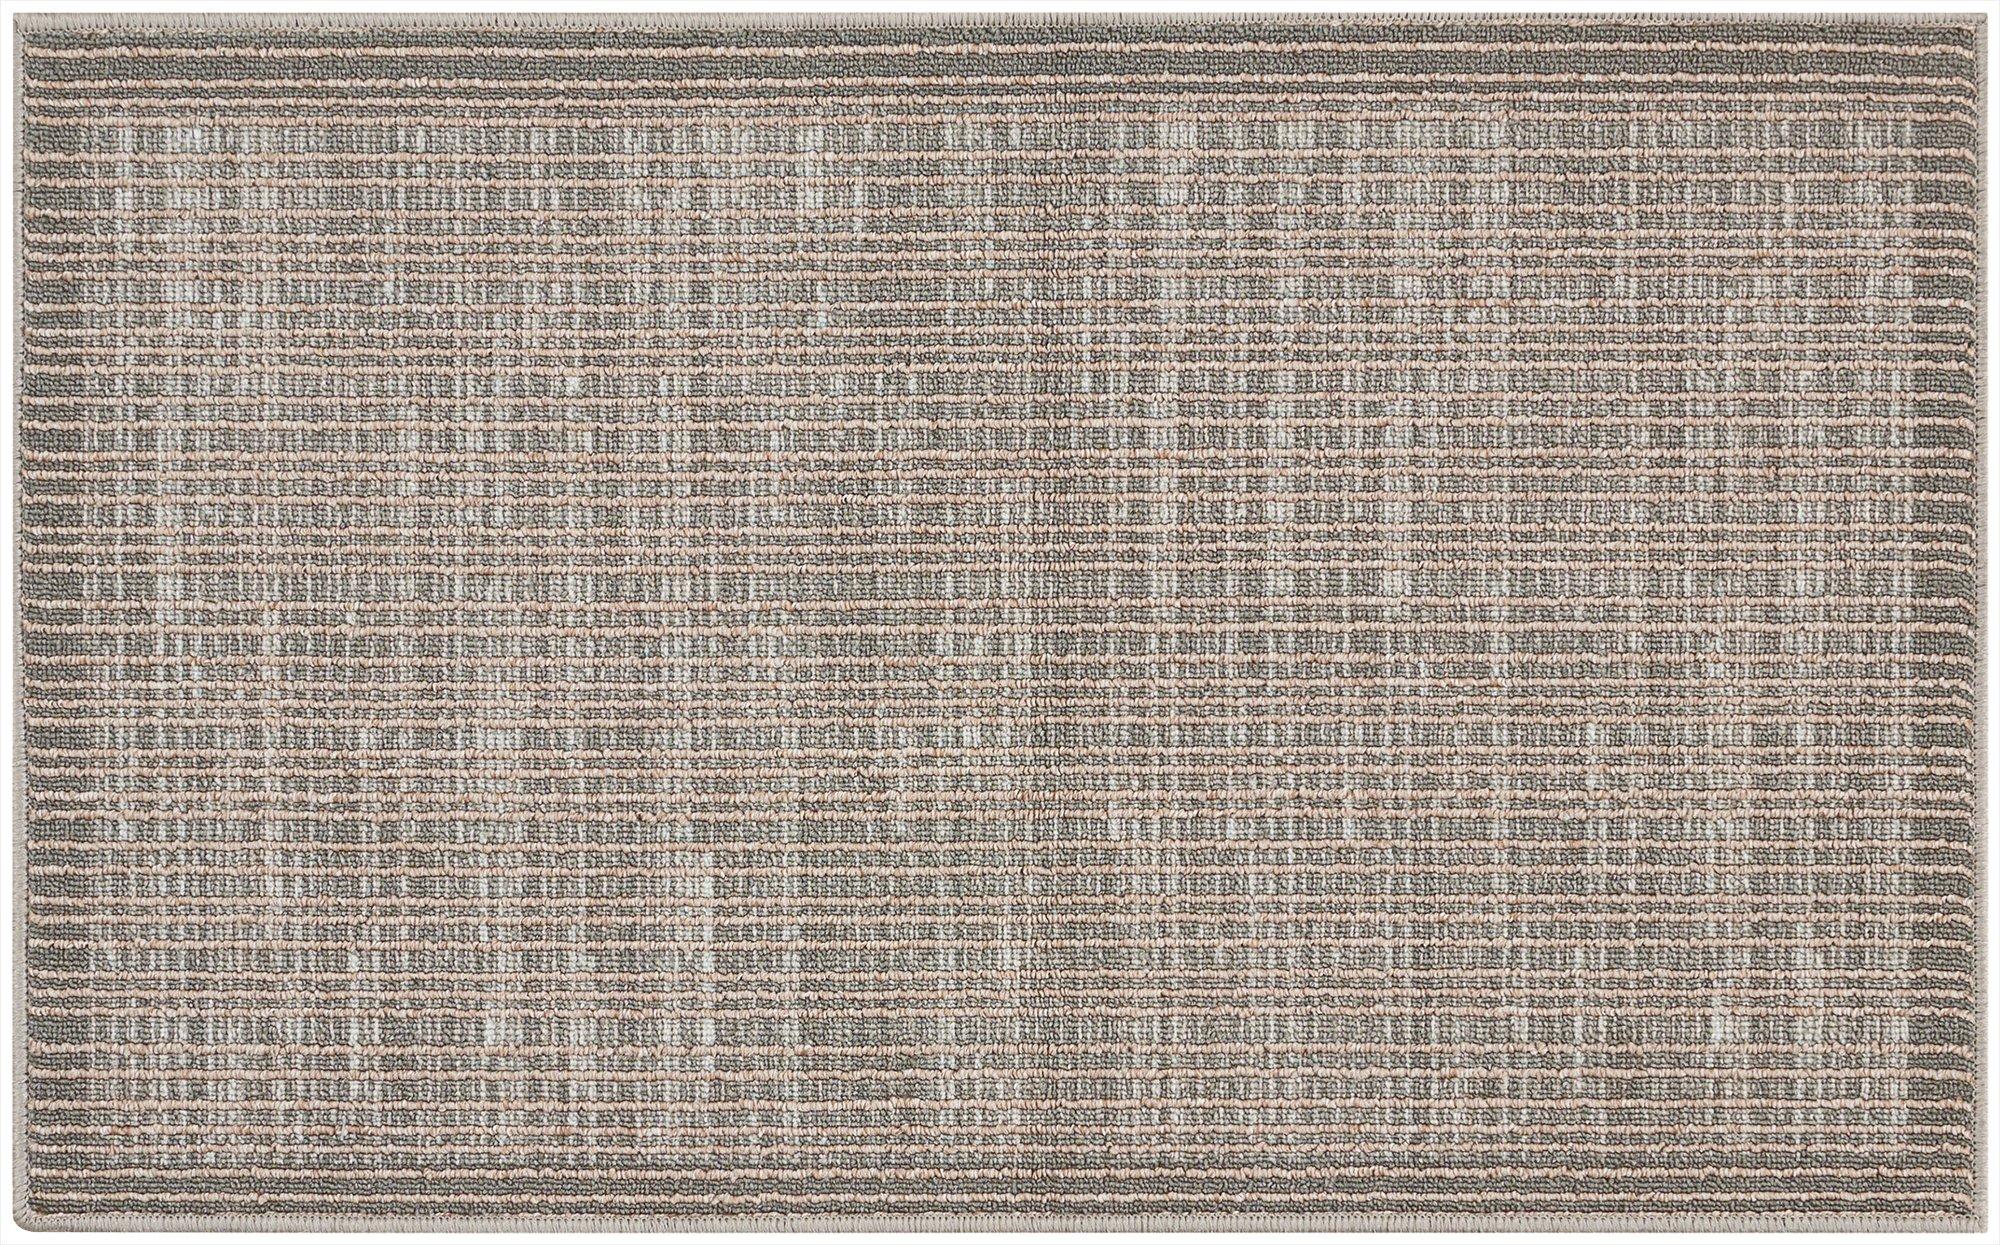 20x32 All Purpose Accent Rug